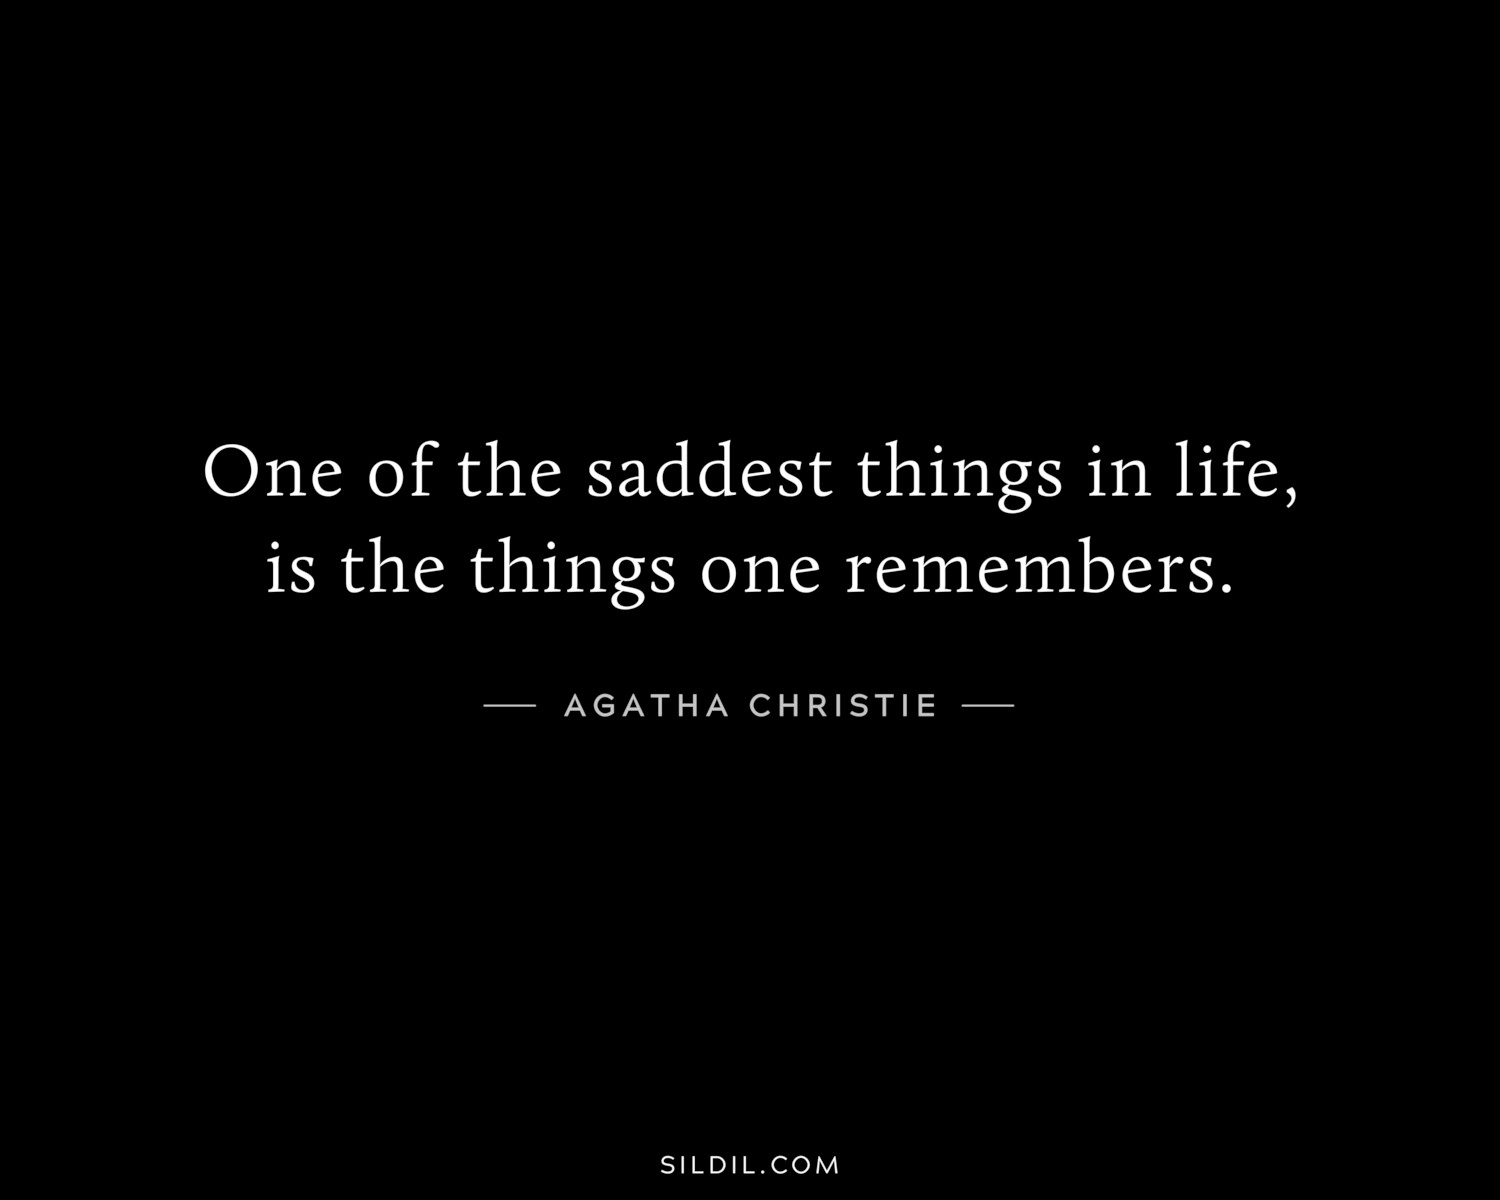 One of the saddest things in life, is the things one remembers.